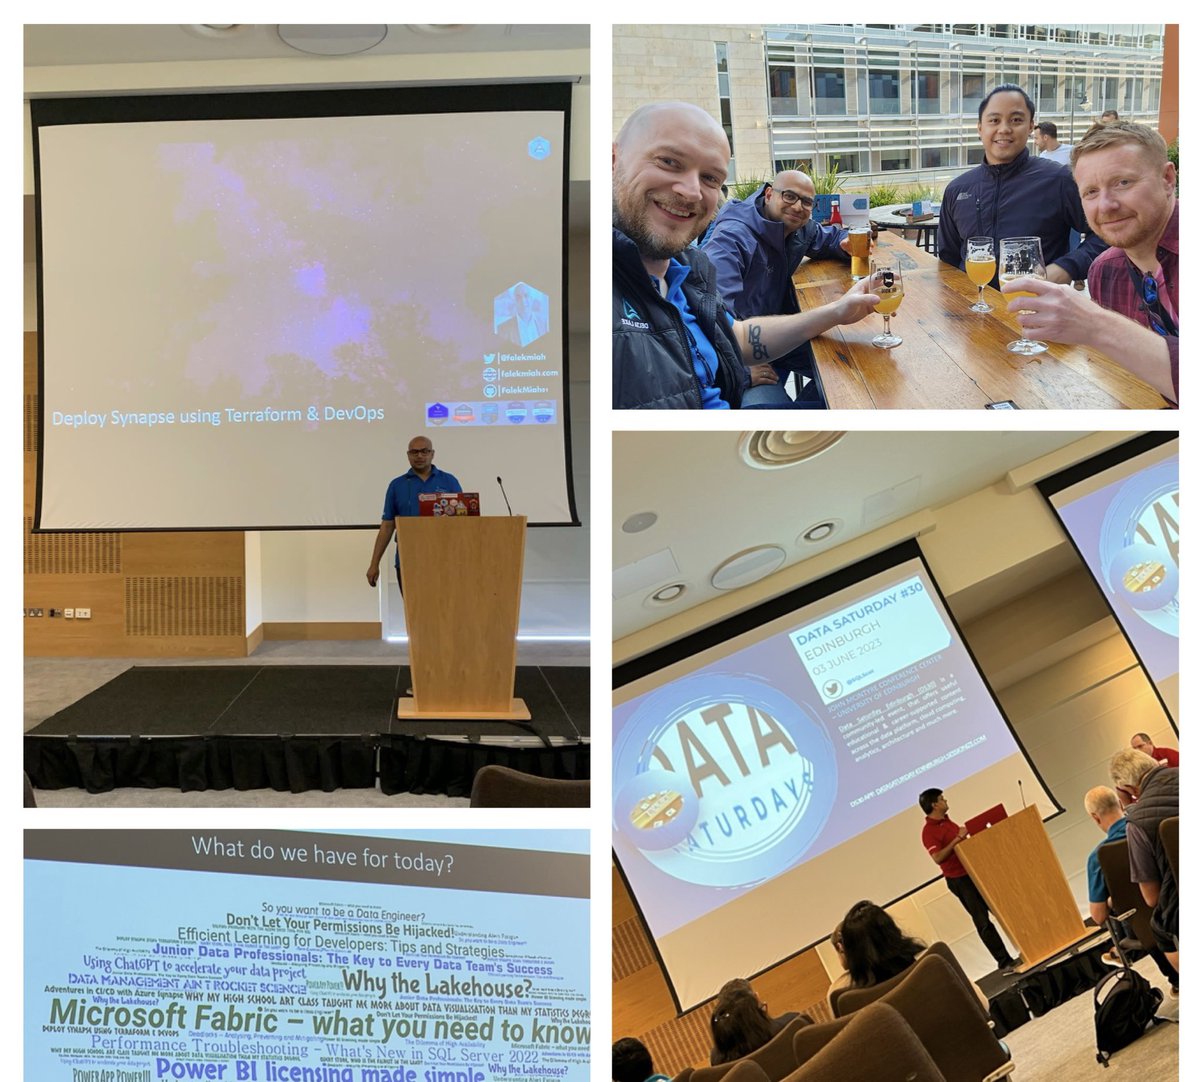 Had a great time at Data Saturday Edinburgh! Big thanks to the organizers and attendees for making it an great event. 

#DataCommunity #DataSaturday #TeamEdinburgh